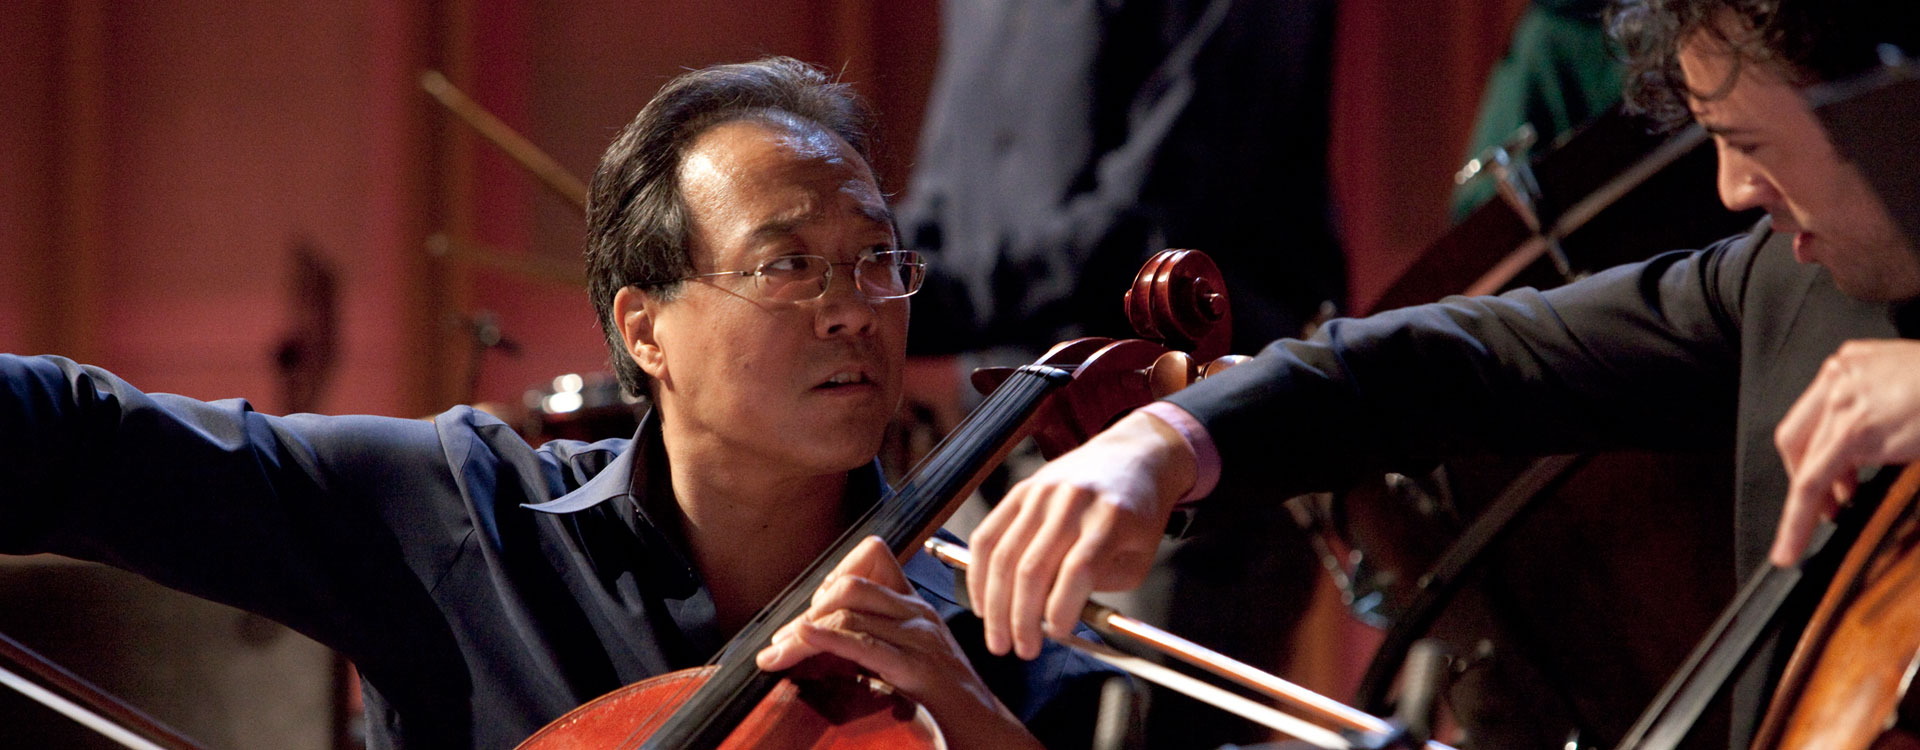 The Silkroad Ensemble with Yo-Yo Ma live from Tanglewood